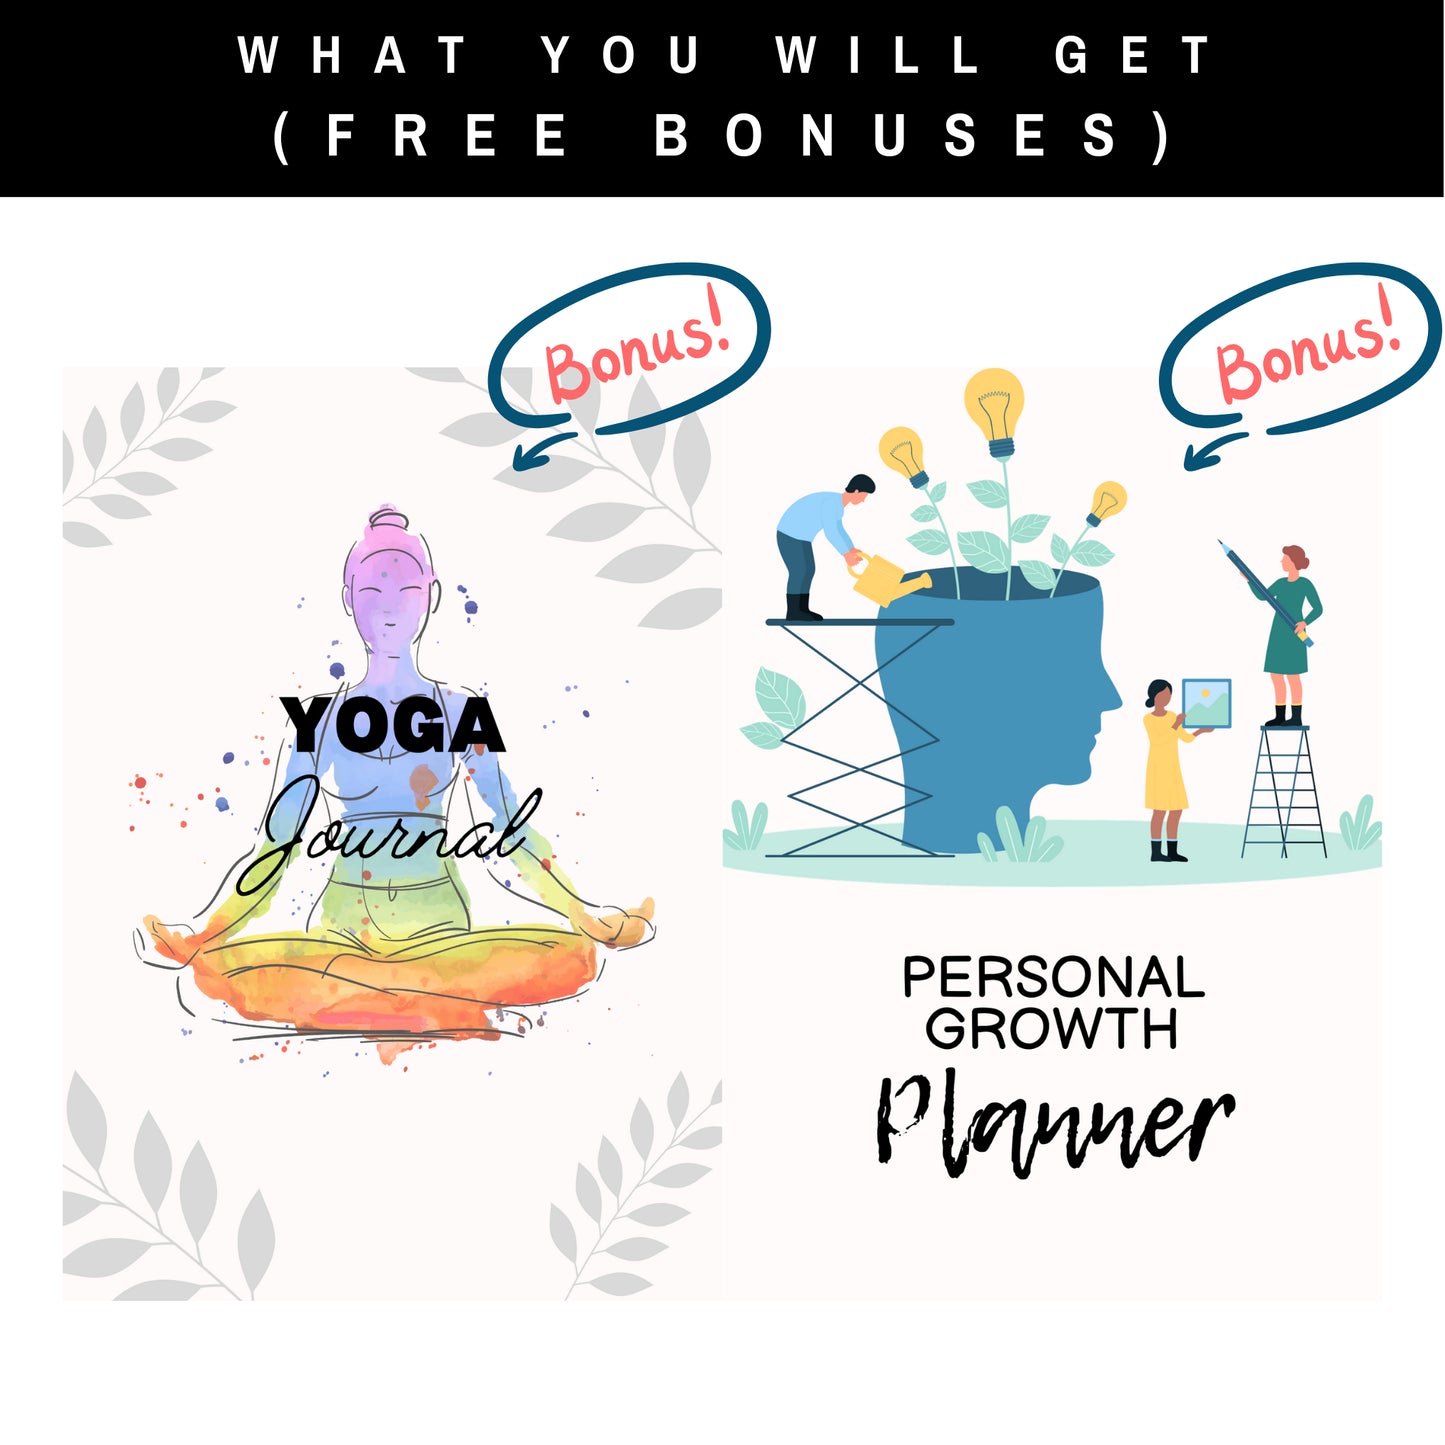 Yoga journal and personal growth planner as a free Bonus